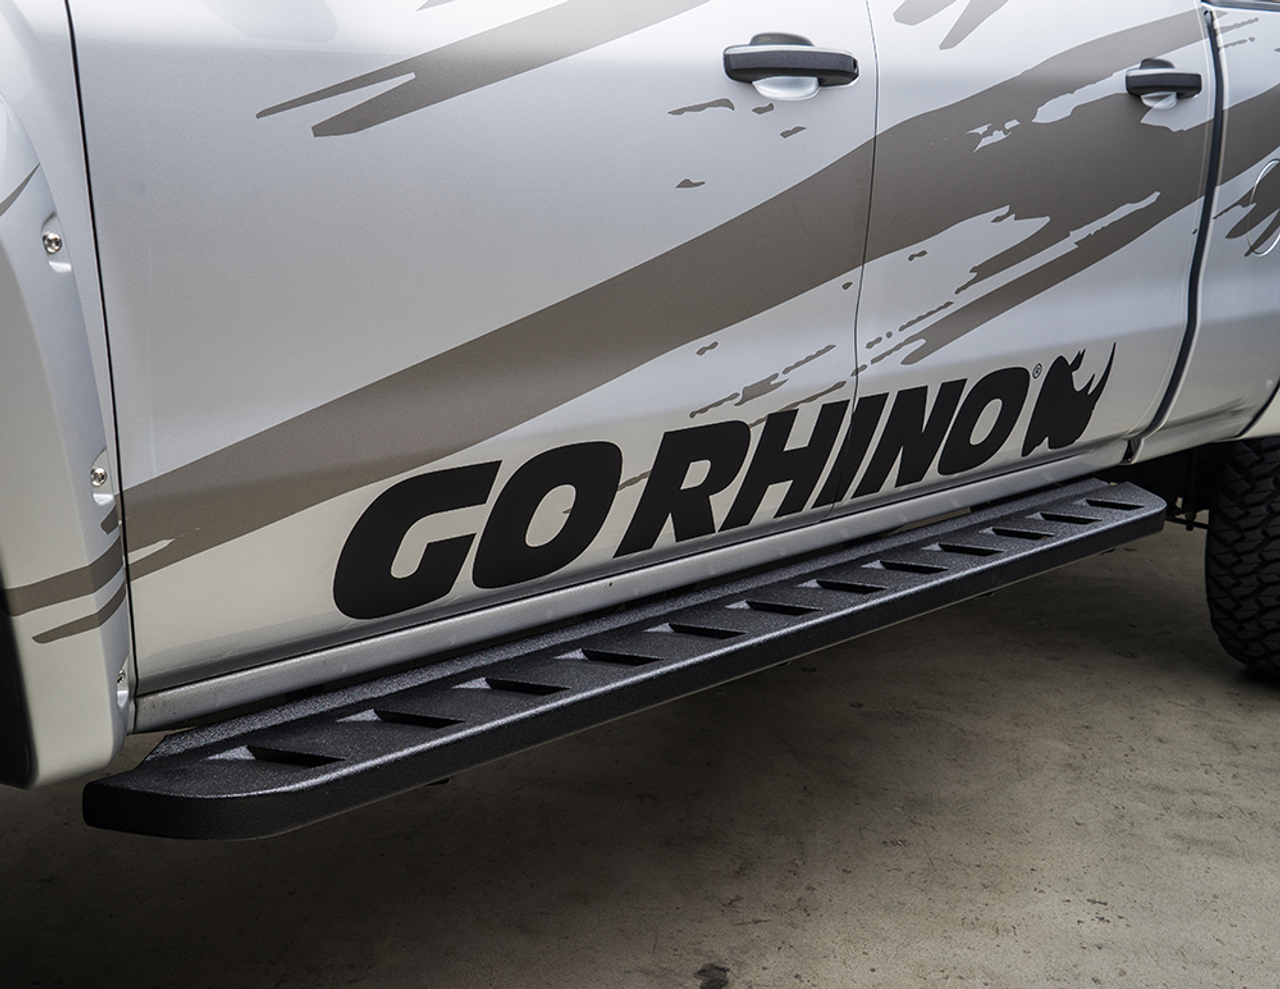 Go Rhino 6341558720T Ford, F-150, 2015 - 2021, RB10 Running boards - Complete Kit:  2 pair RB10 Drop Steps, Galvanized Steel, Protective Bedliner coating, 630087T RB10 + 6941555 RB Brackets + (2) 69420000T Drop Down Step